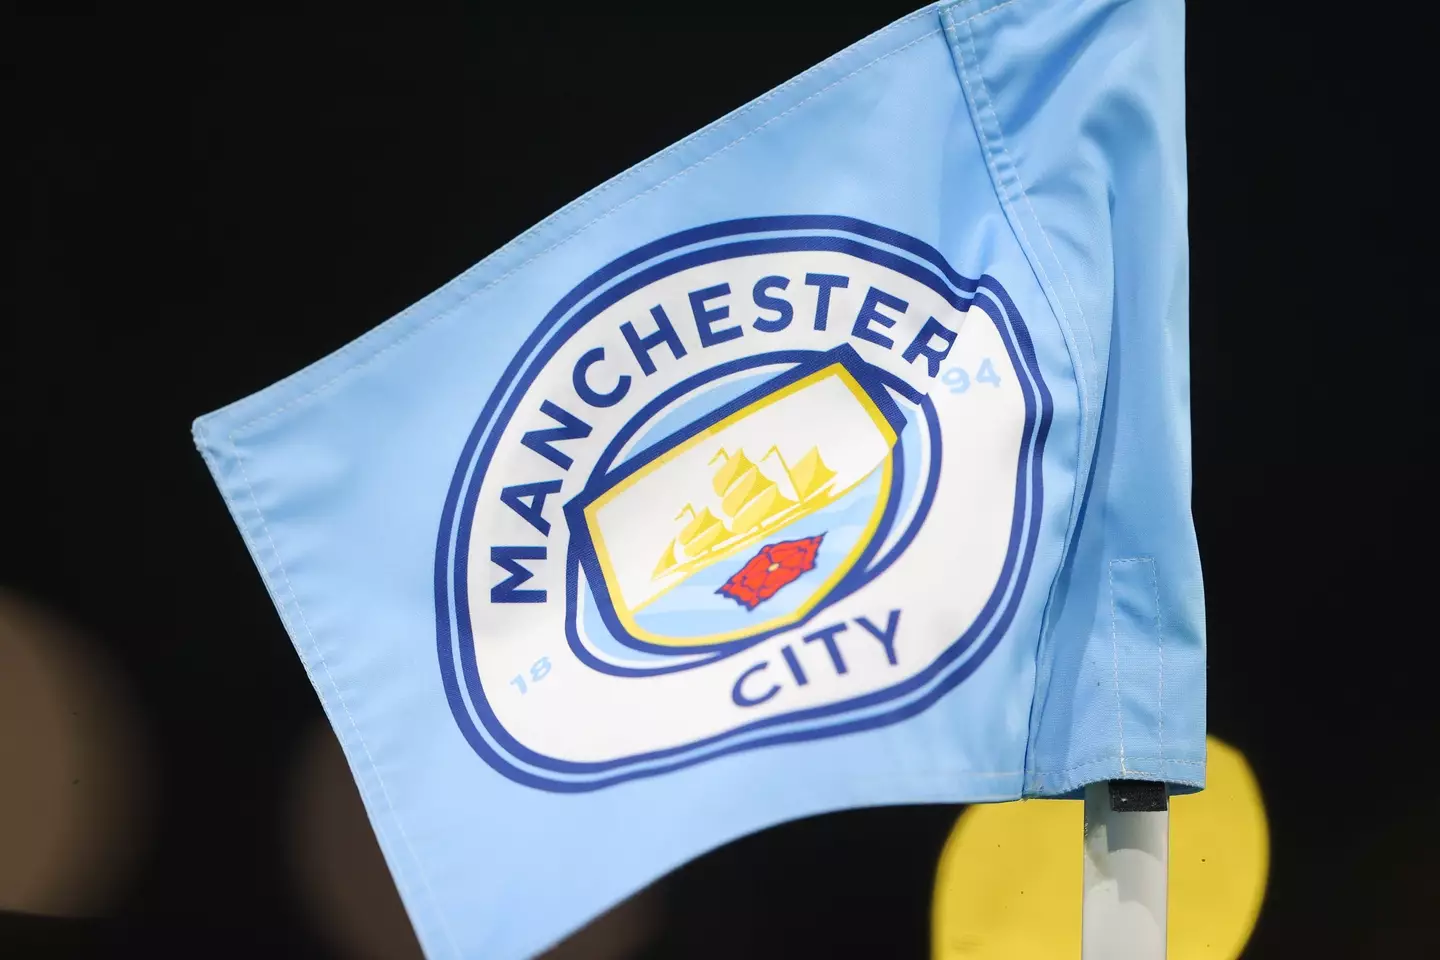 City have denied any wrongdoing. (Image